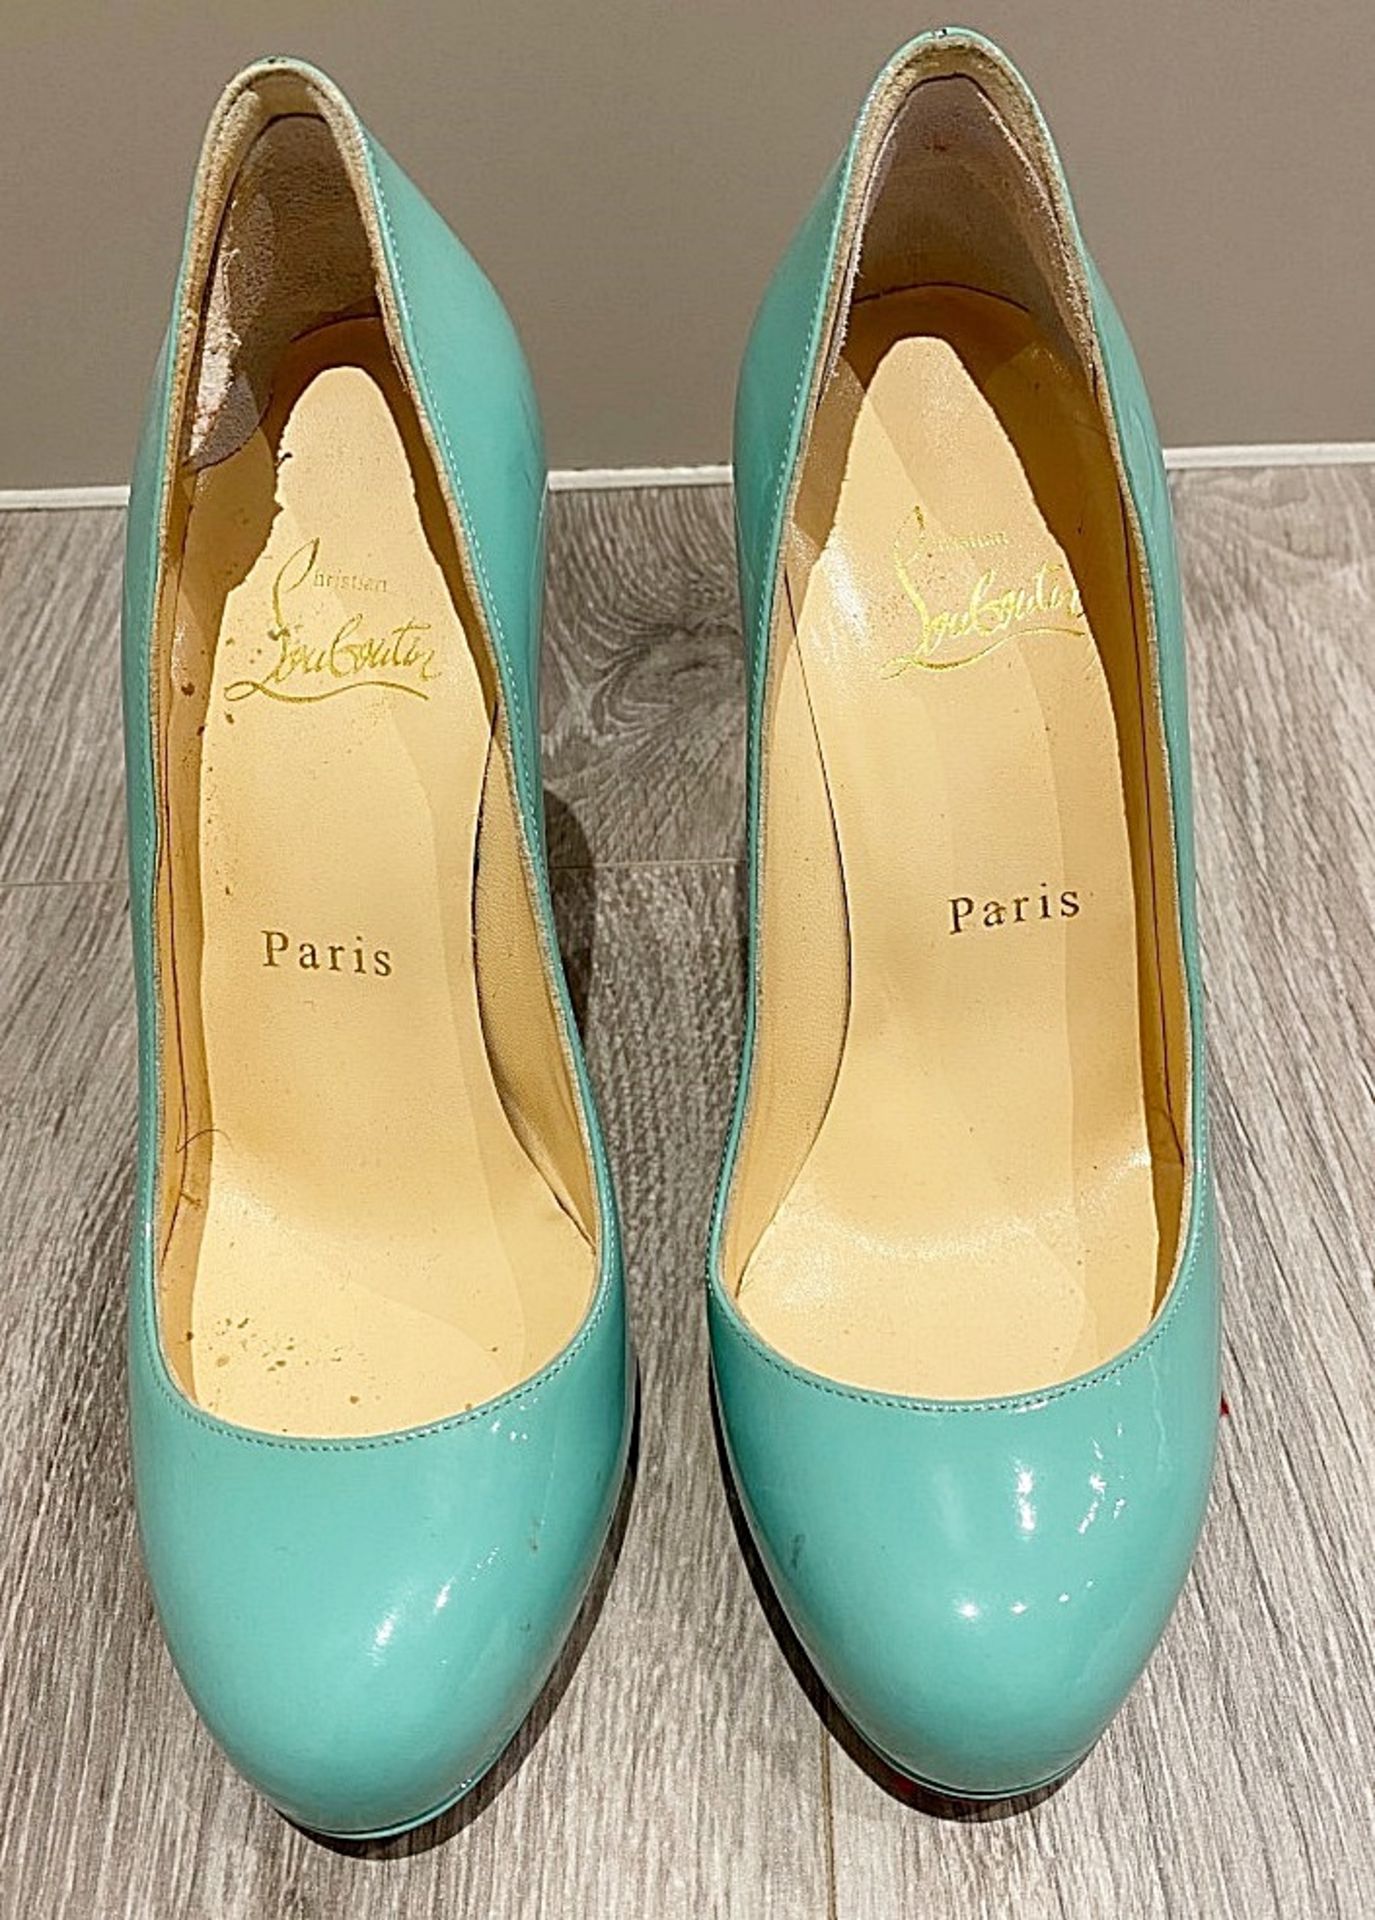 1 x Pair Of Genuine Christain Louboutin High Heel Shoes In Mint Green - Size: 36 - Preowned in Worn